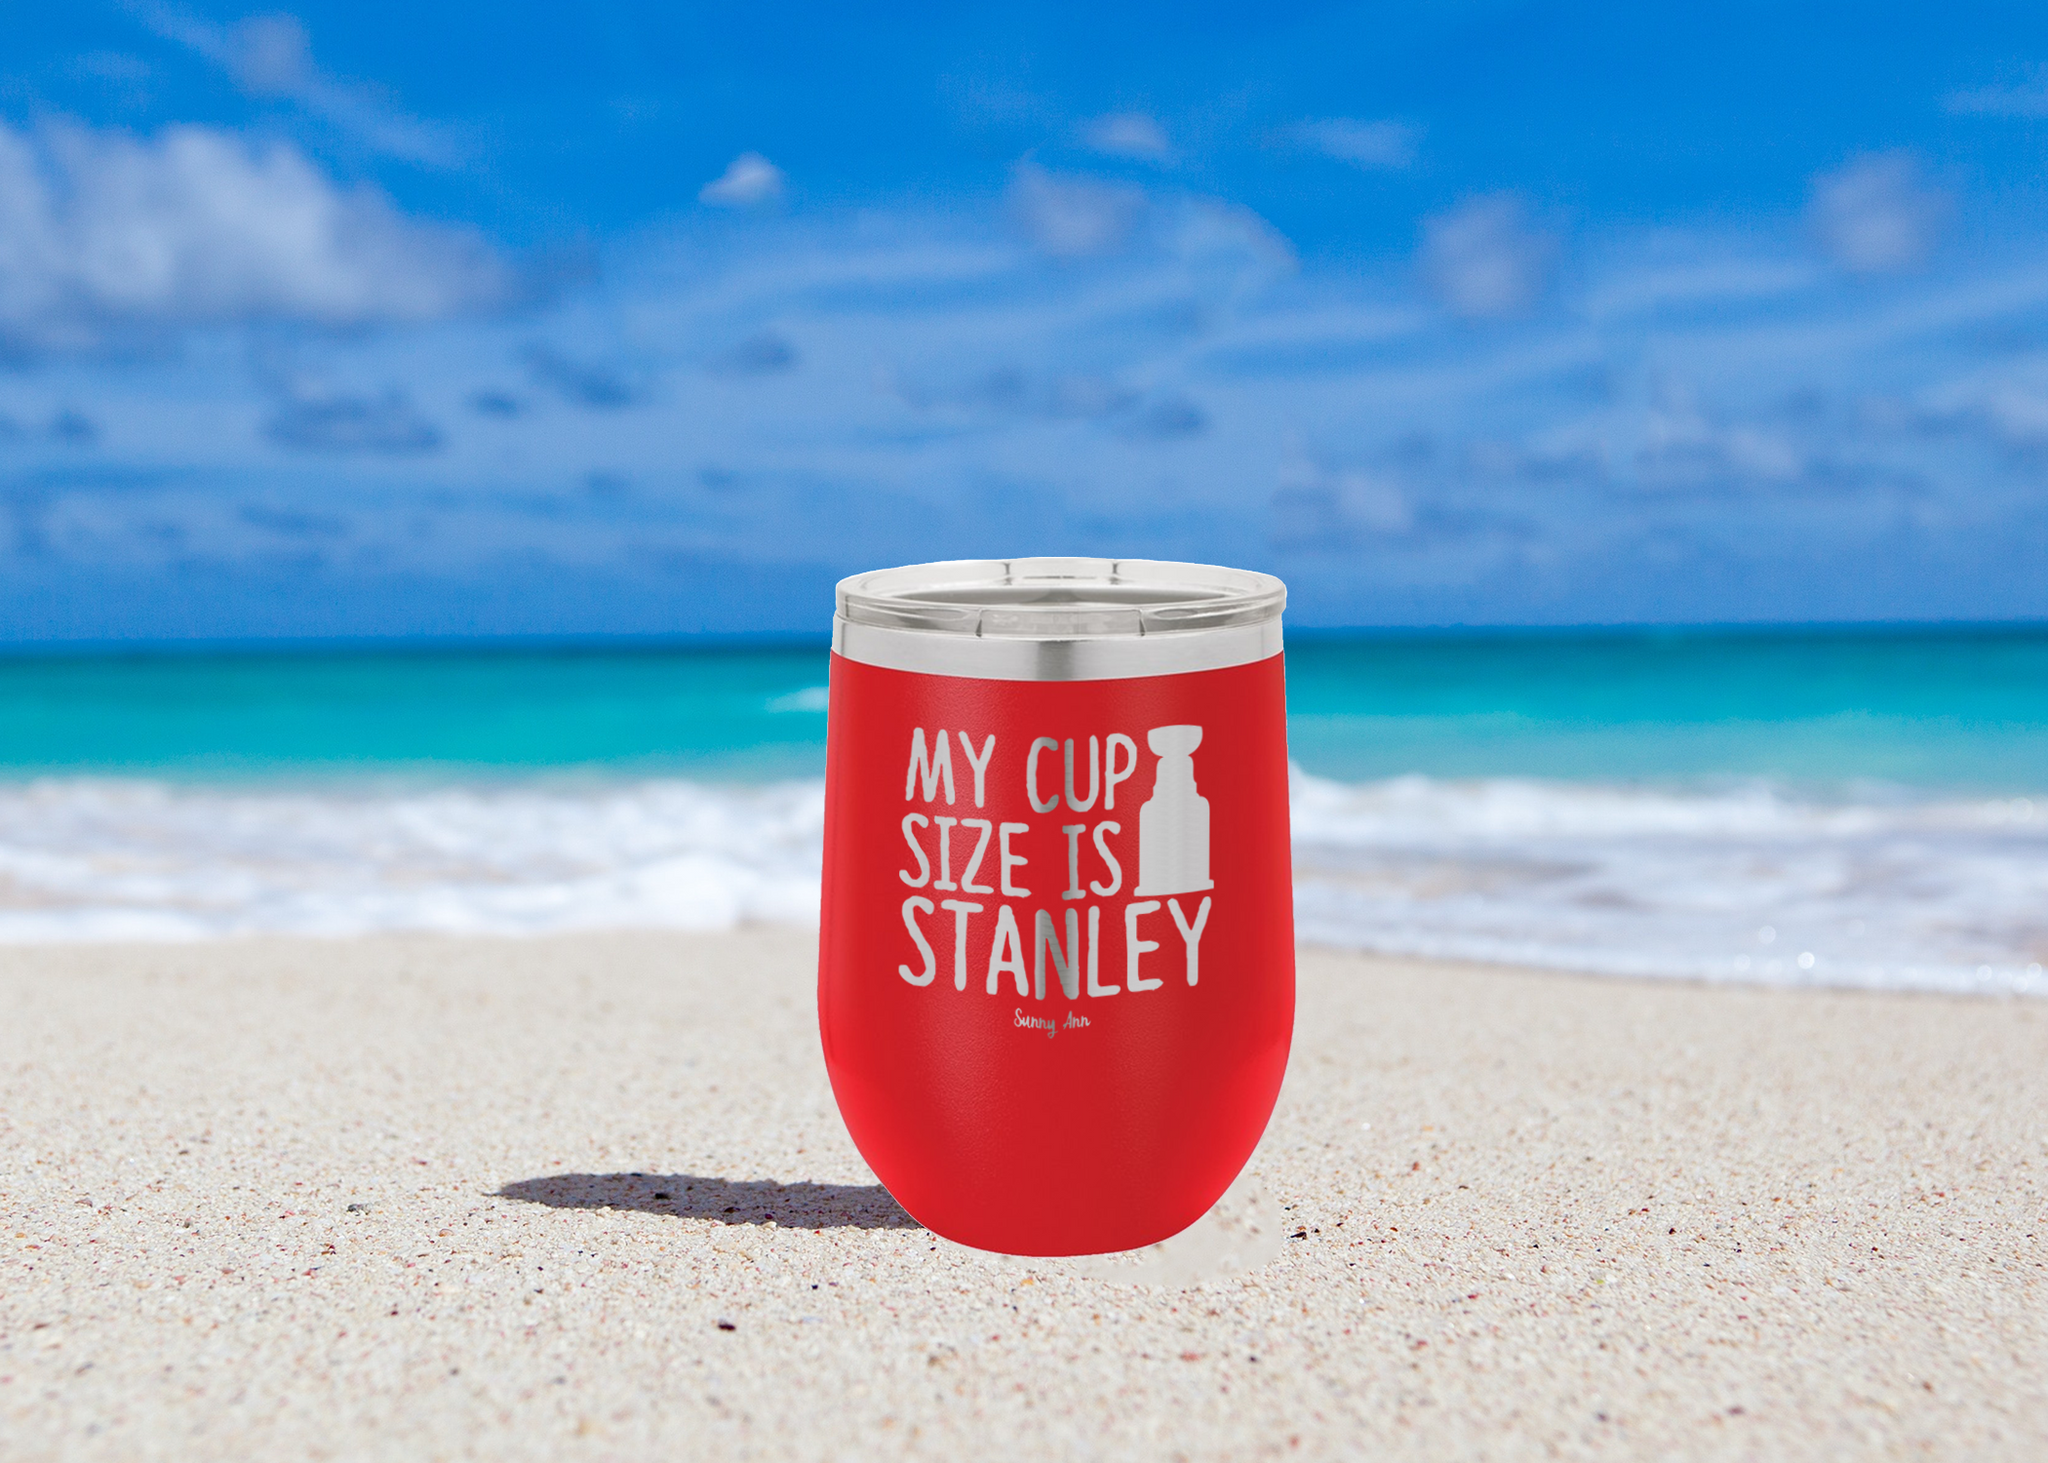 My New Stanley Cup, Gallery posted by Thats_Lisi